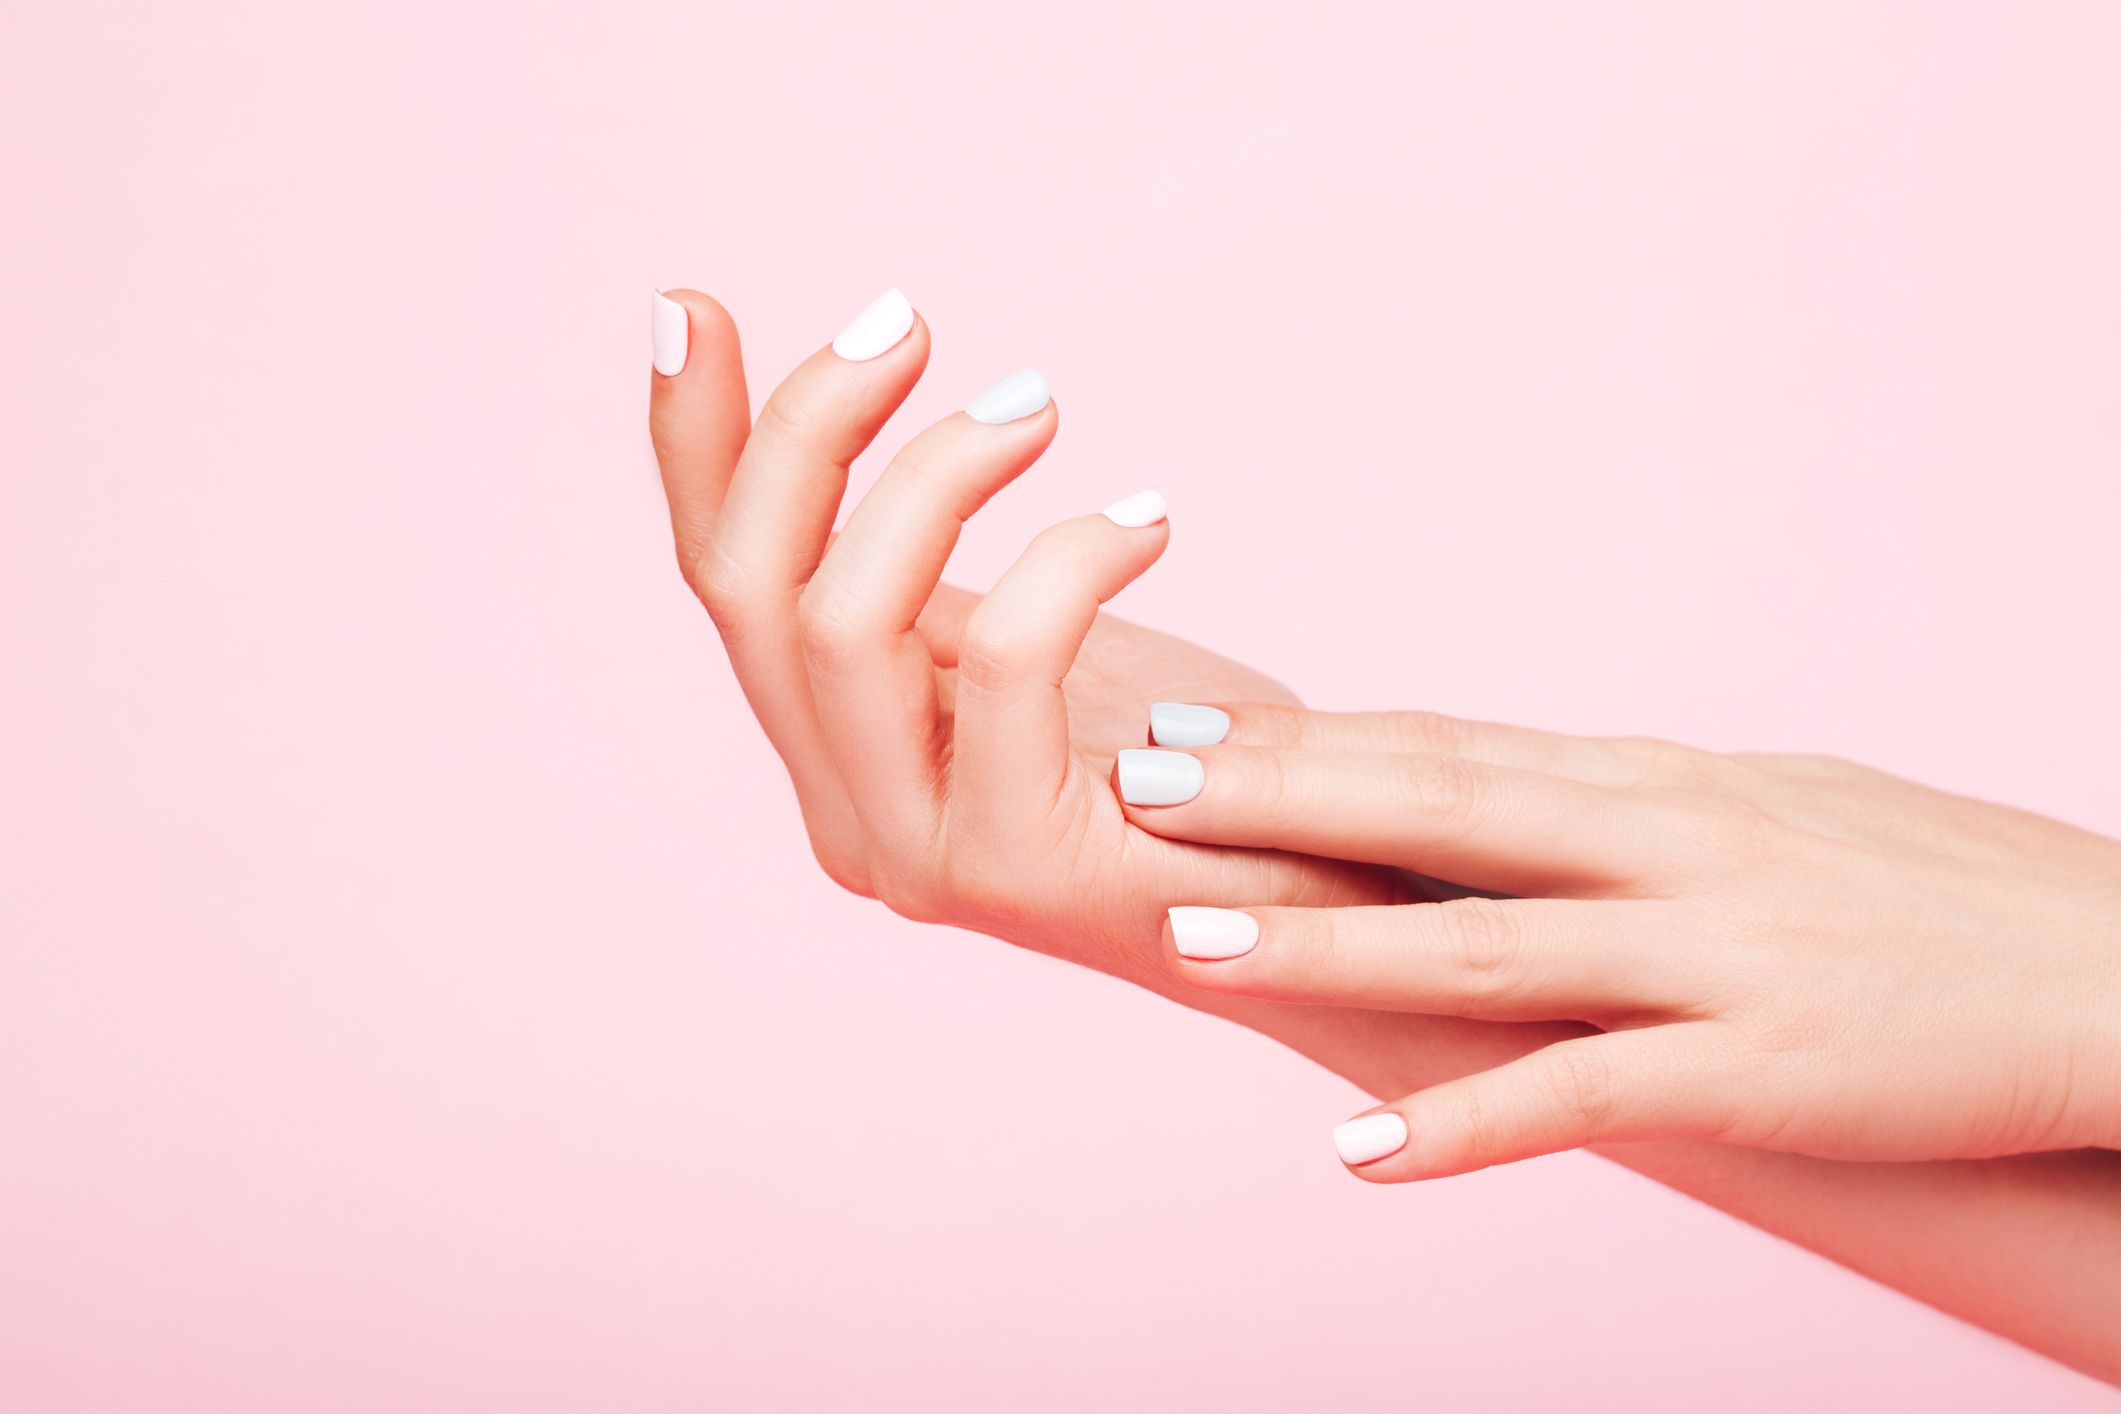 Photogenic Poses to Show Off Manicure * Tom Robertson Photo